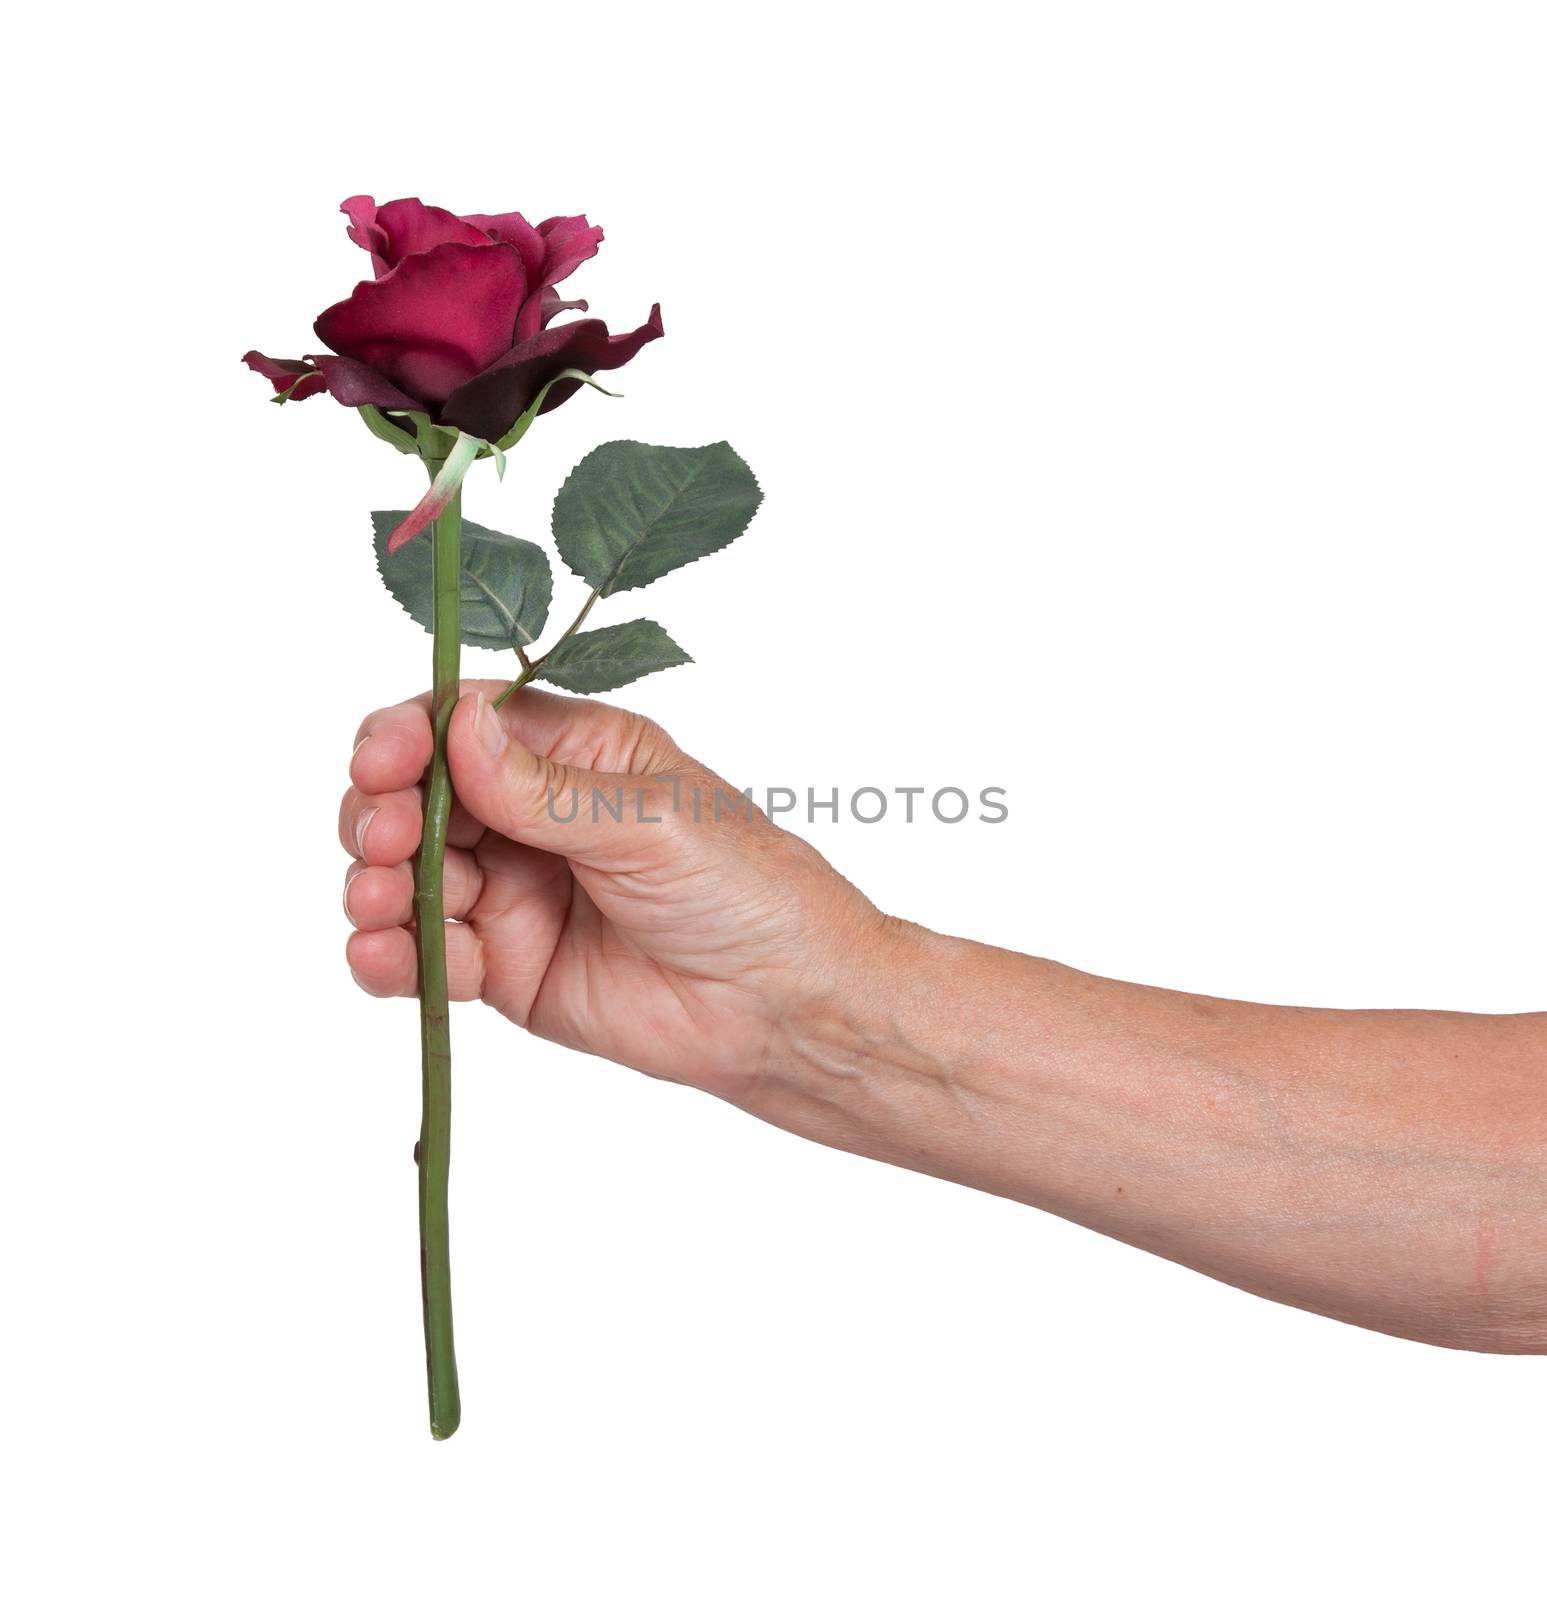 Old hand giving a rose by michaklootwijk